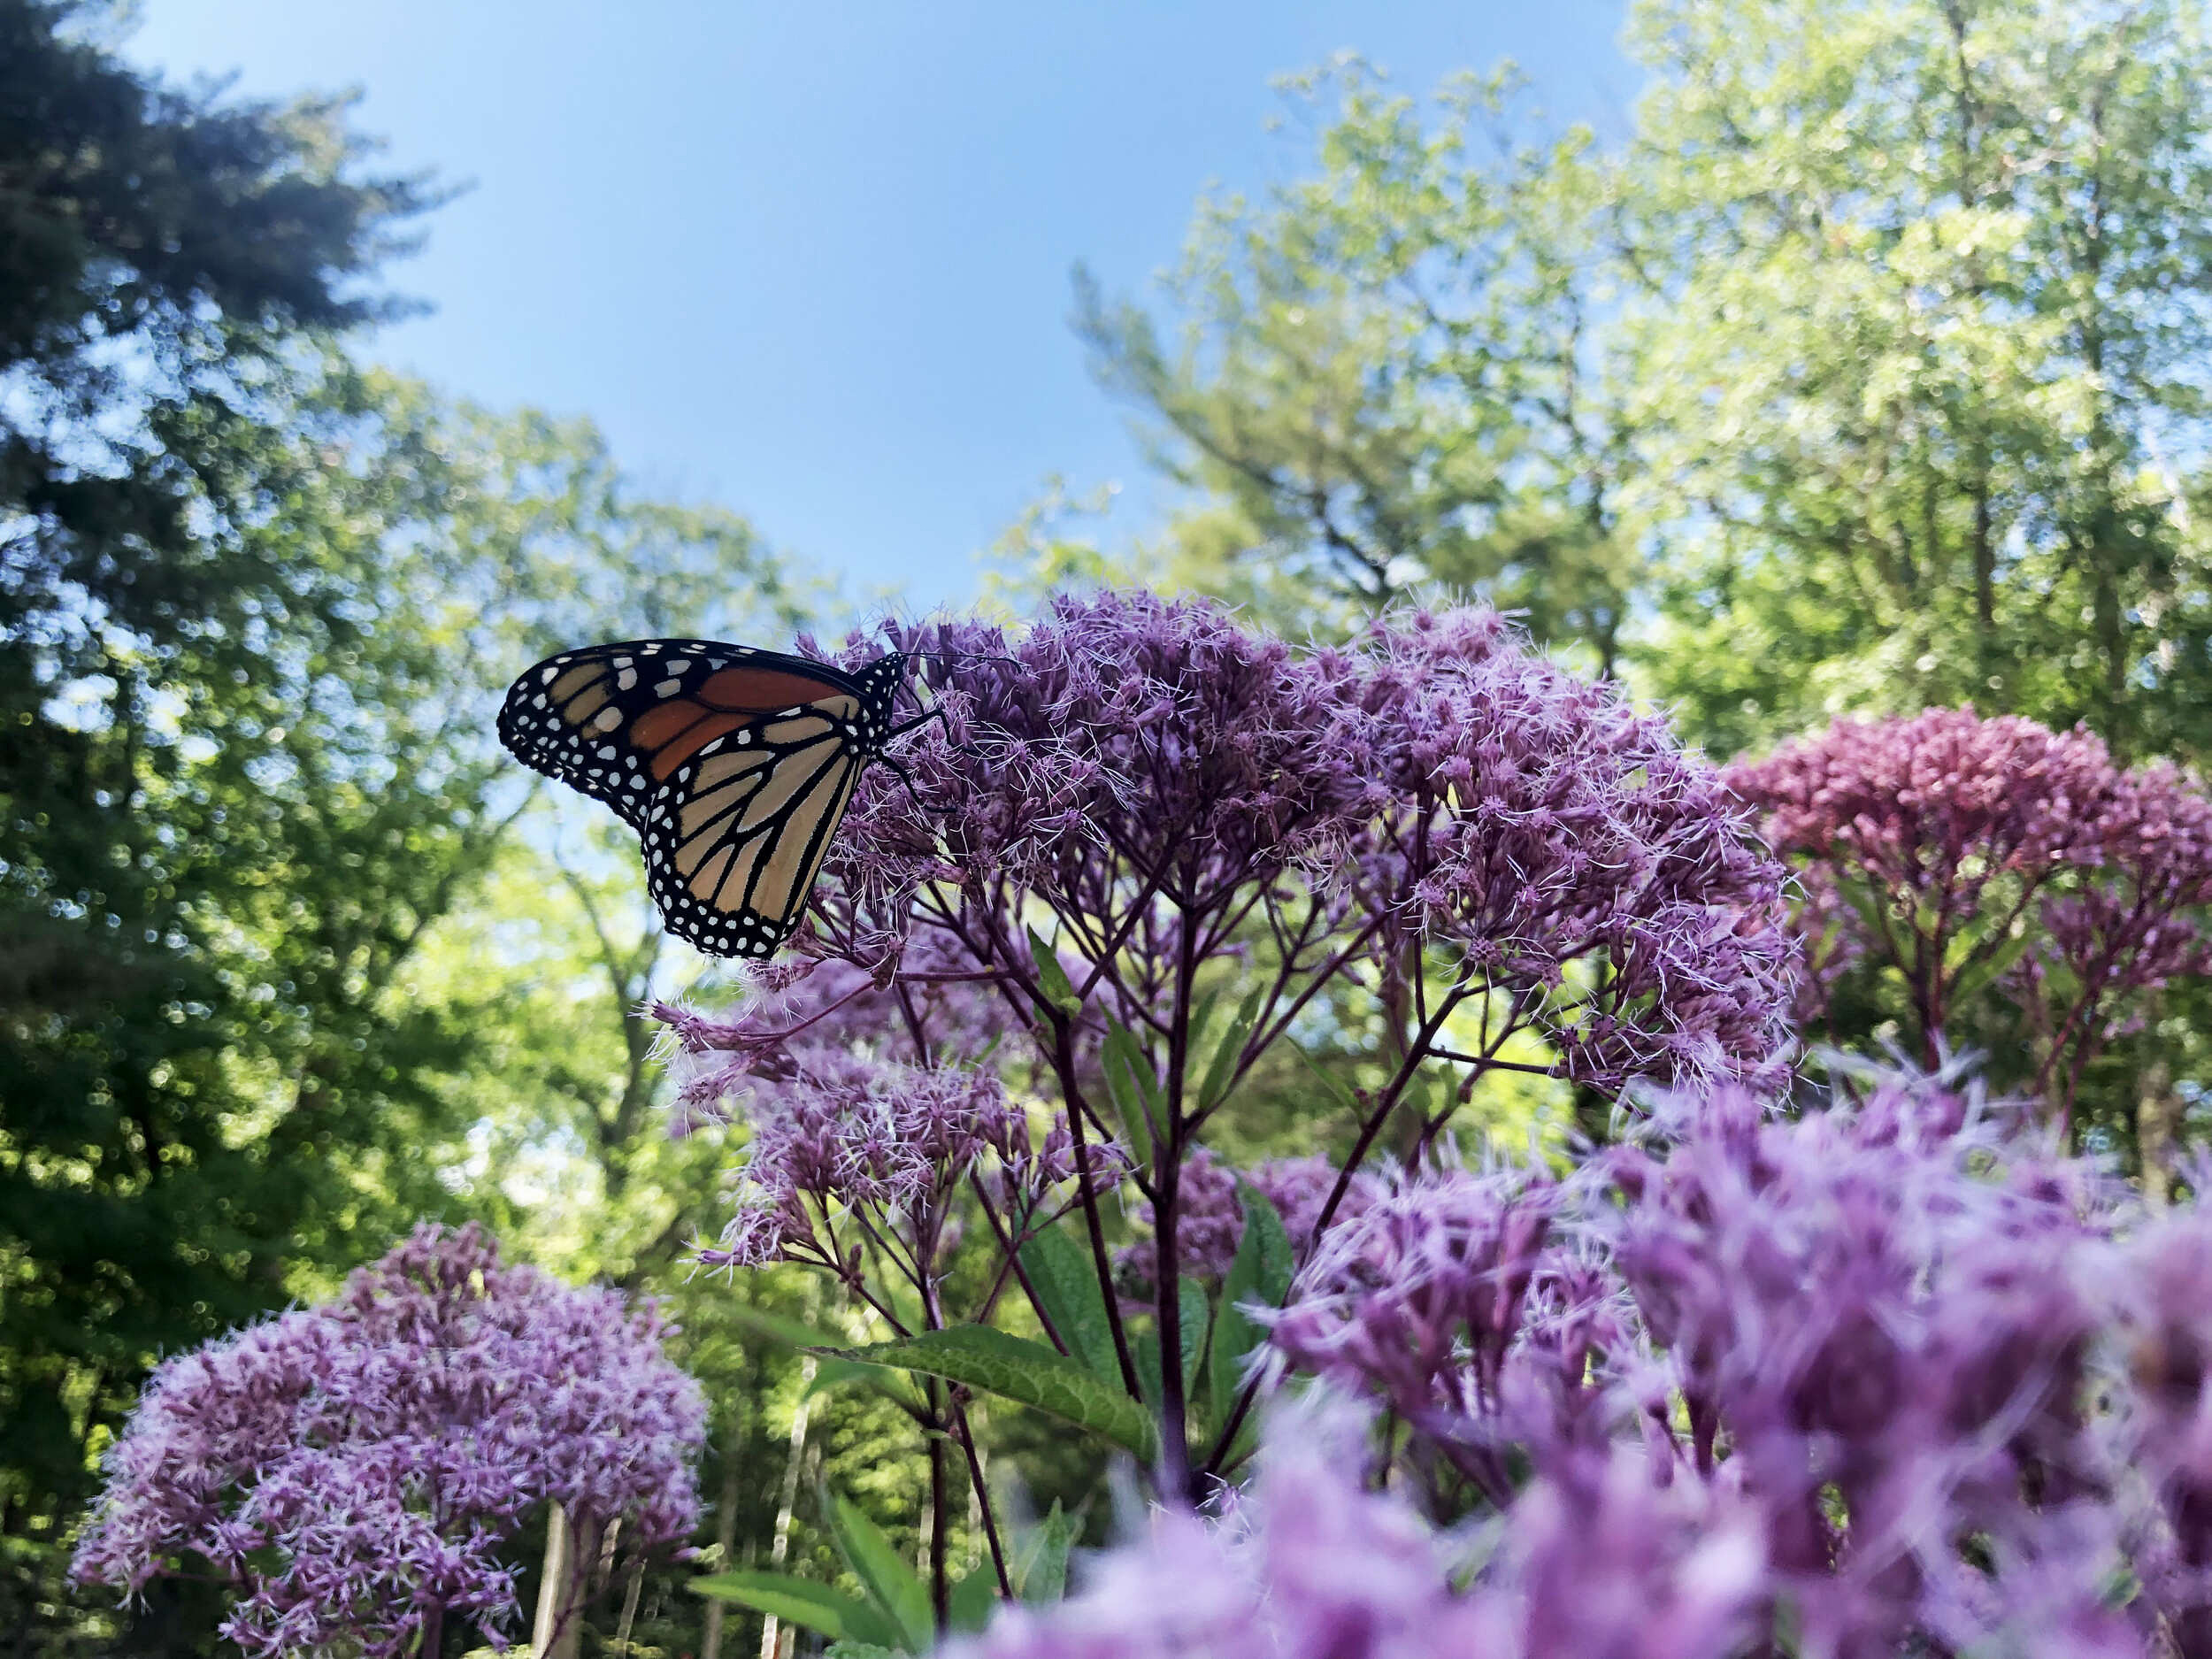 A monarch butterfly on a Joe-Pye weed, with green trees and a blue sky in the background. (photo © Brett Amy Thelen)